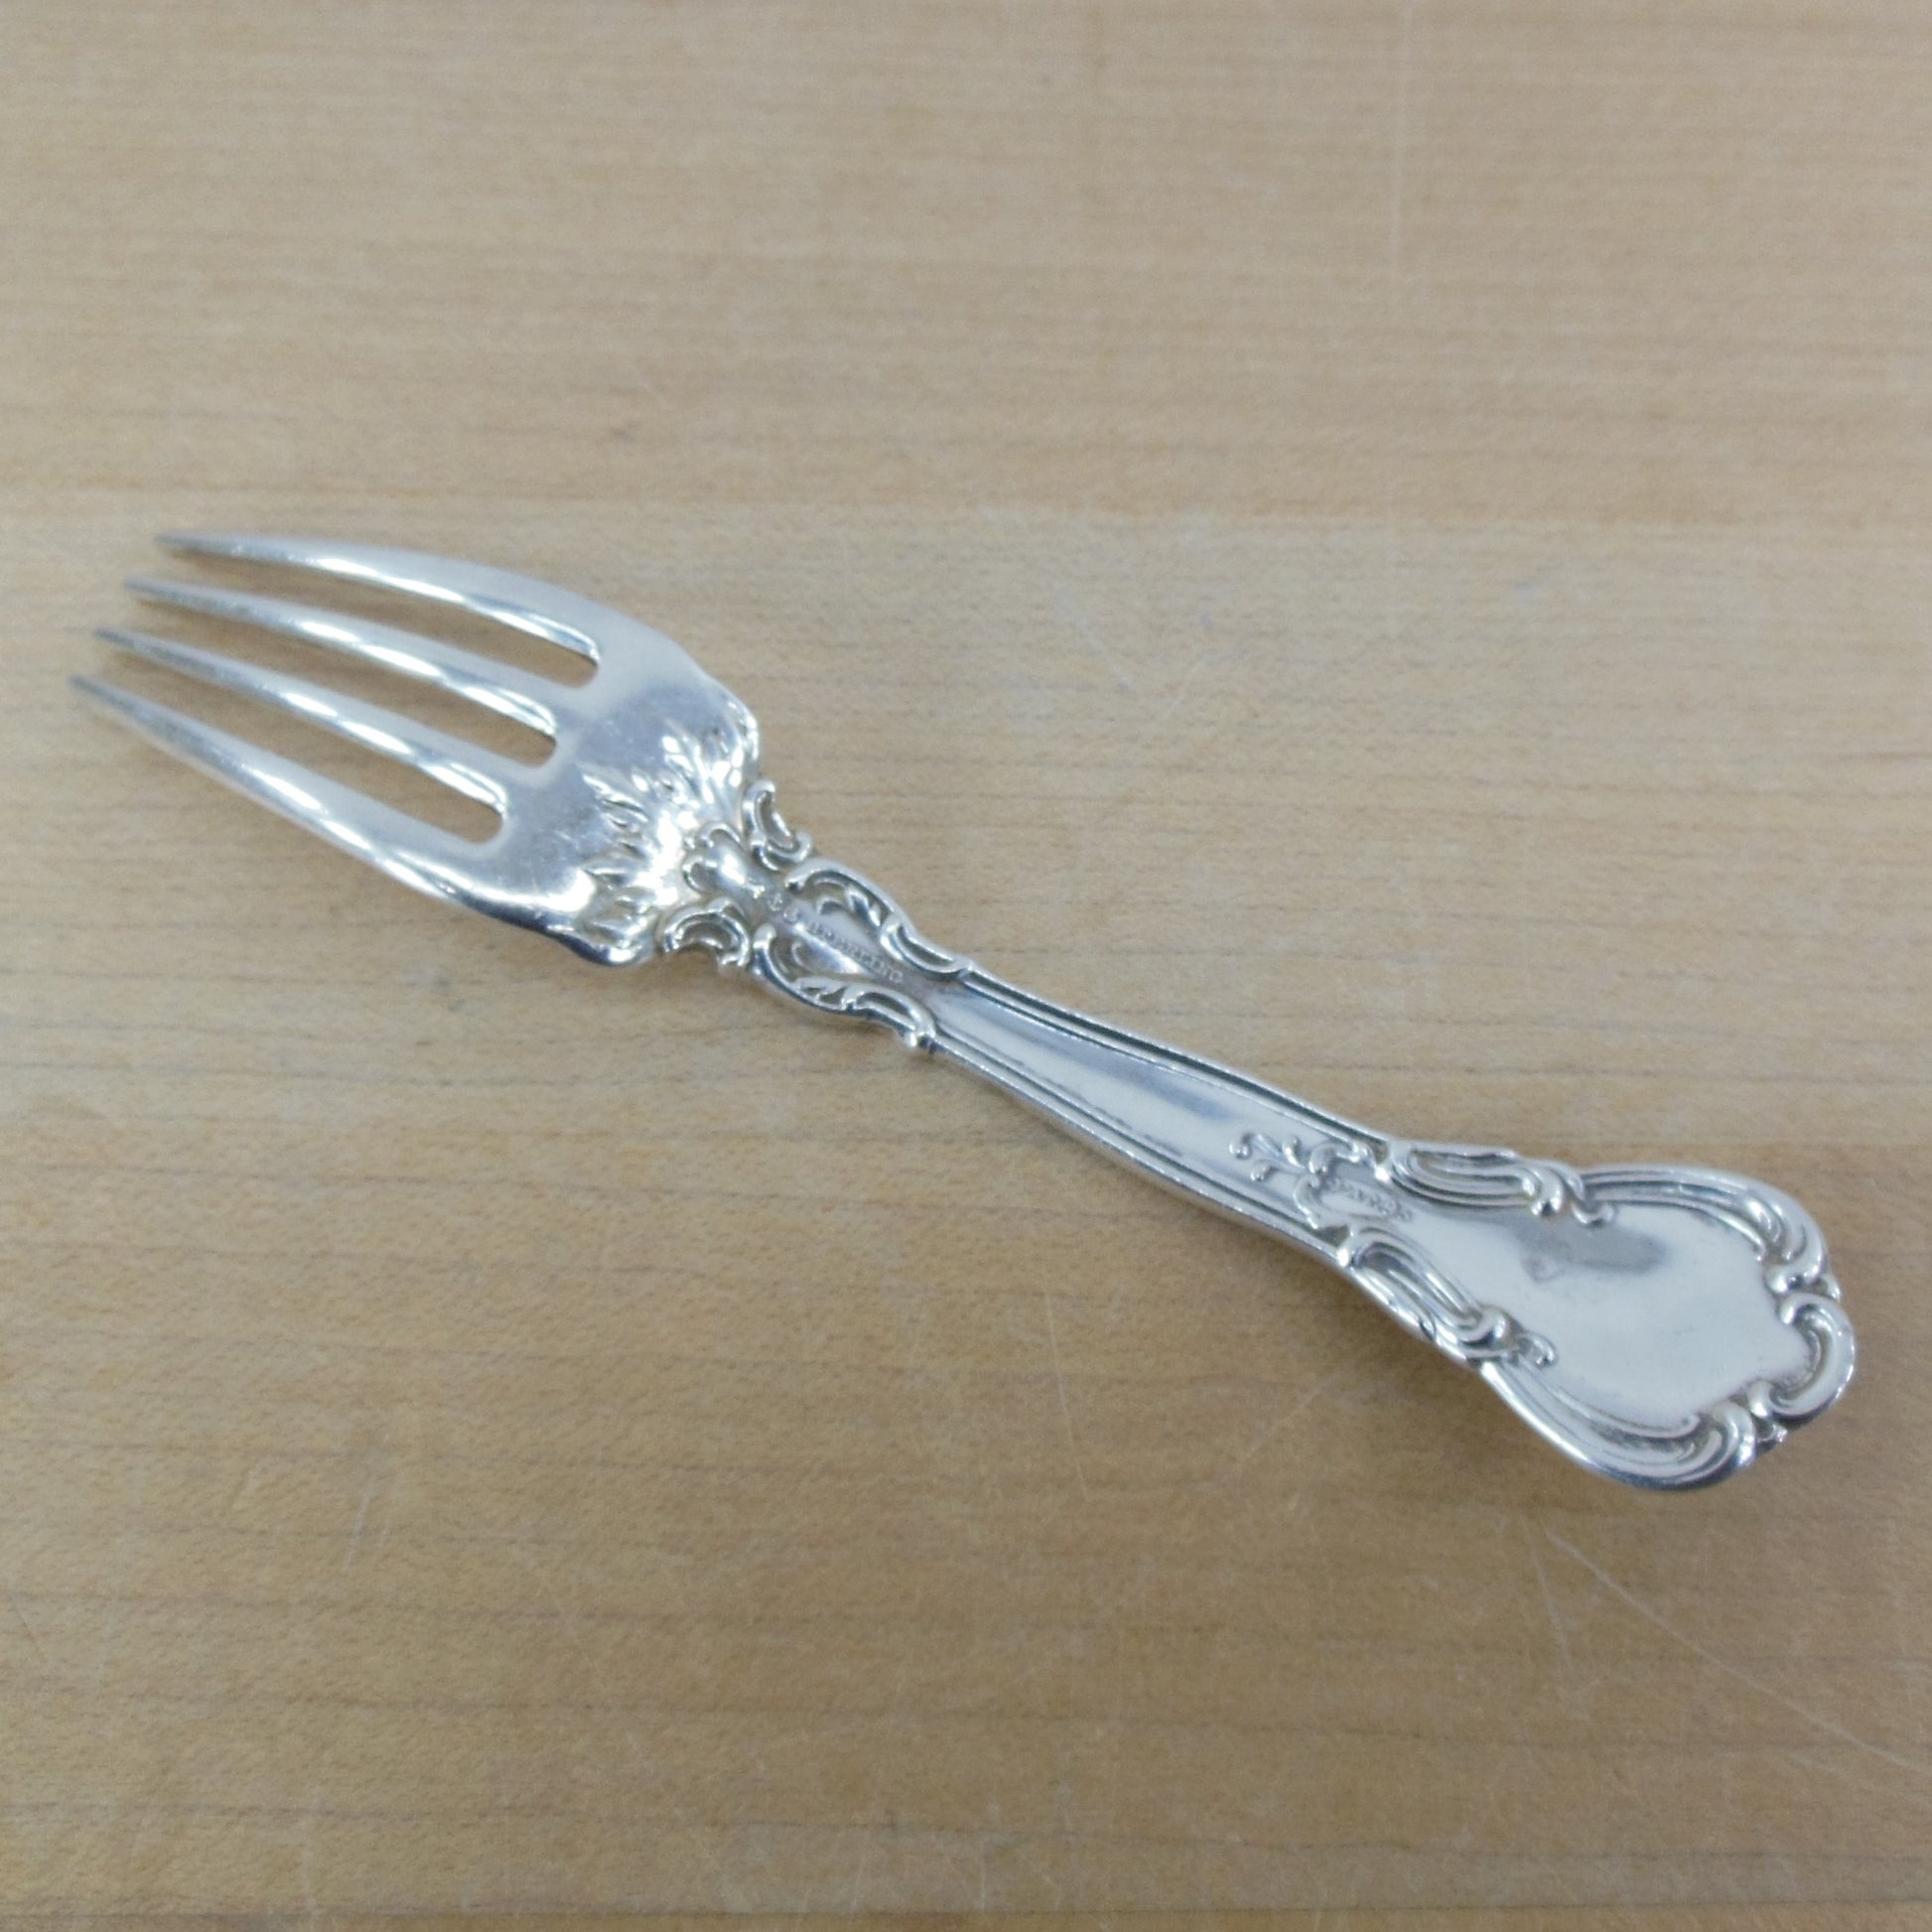 Gorham Chantilly Sterling Silver Baby Child Fork Used